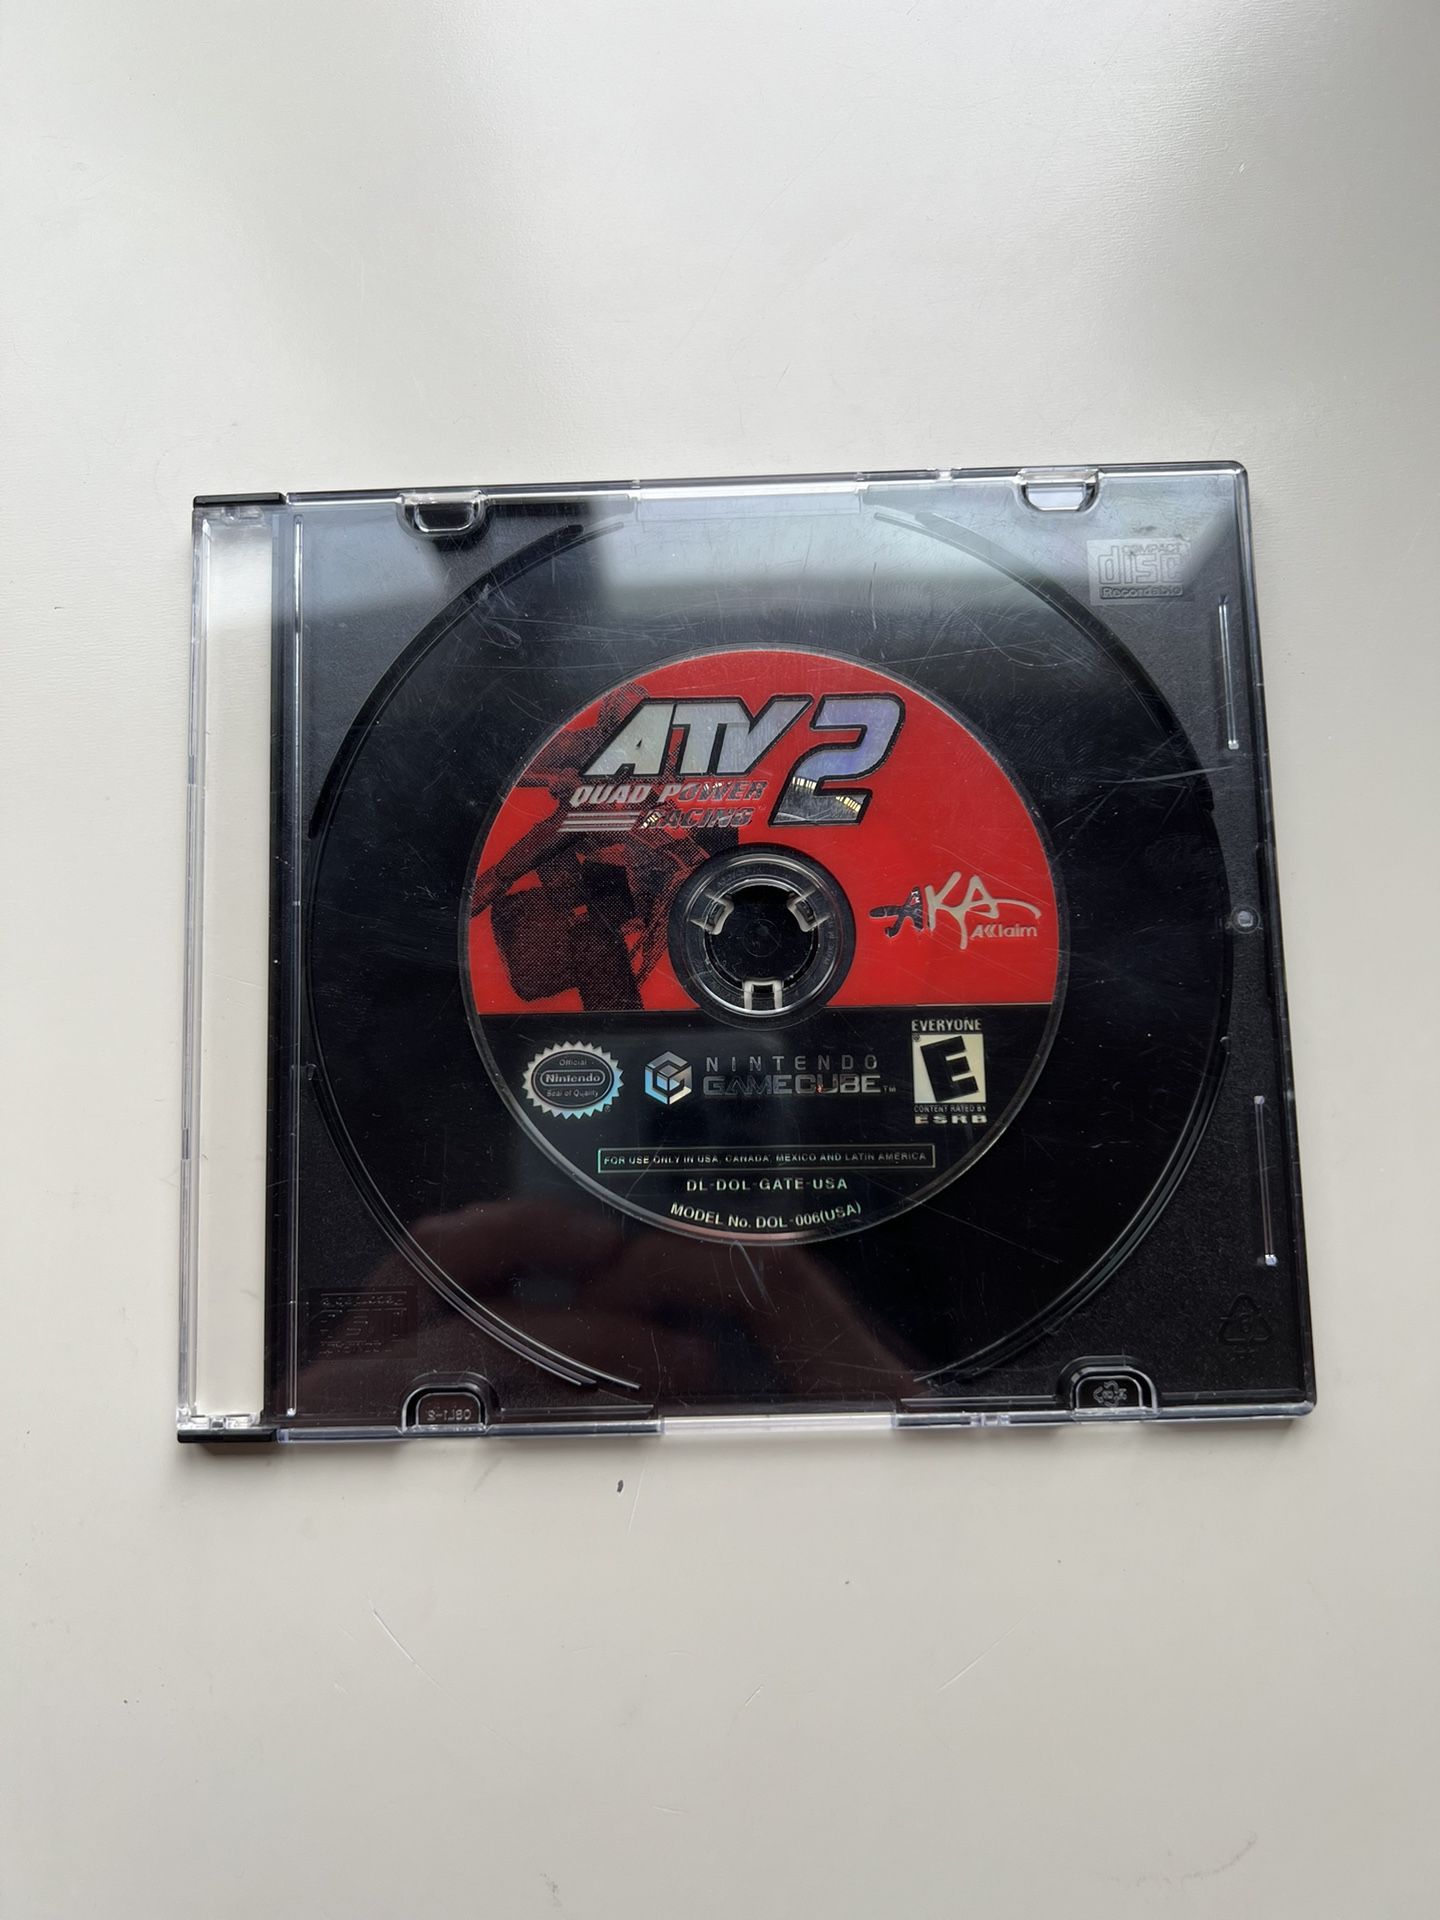 ATV 2 Quad Power Racing Nintendo Gamecube Disc Only Tested & Working